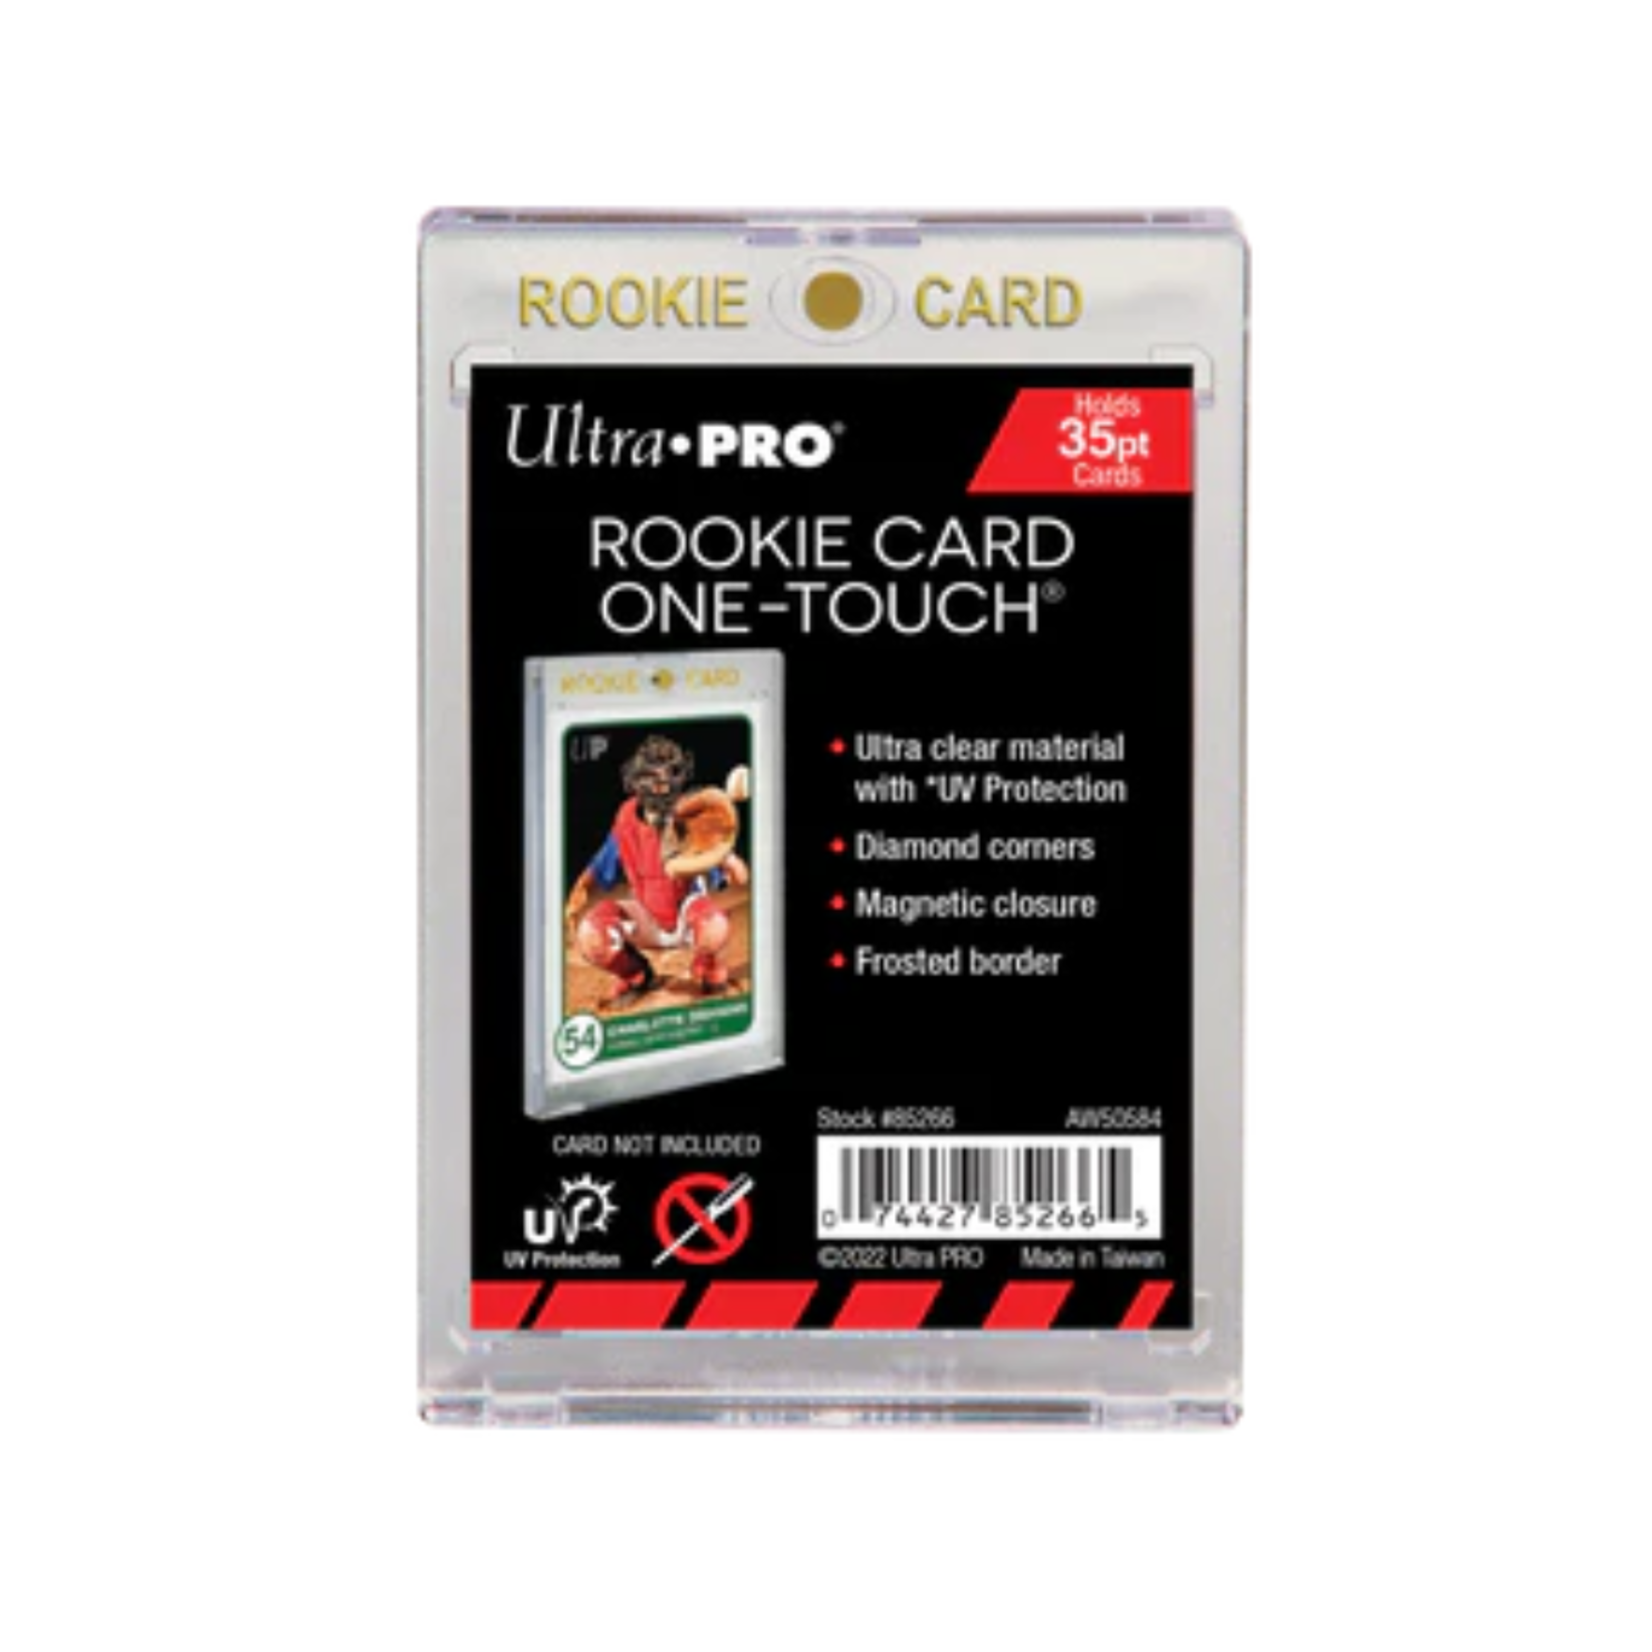 Ultra Pro One-Touch 35pt Rookie Gold